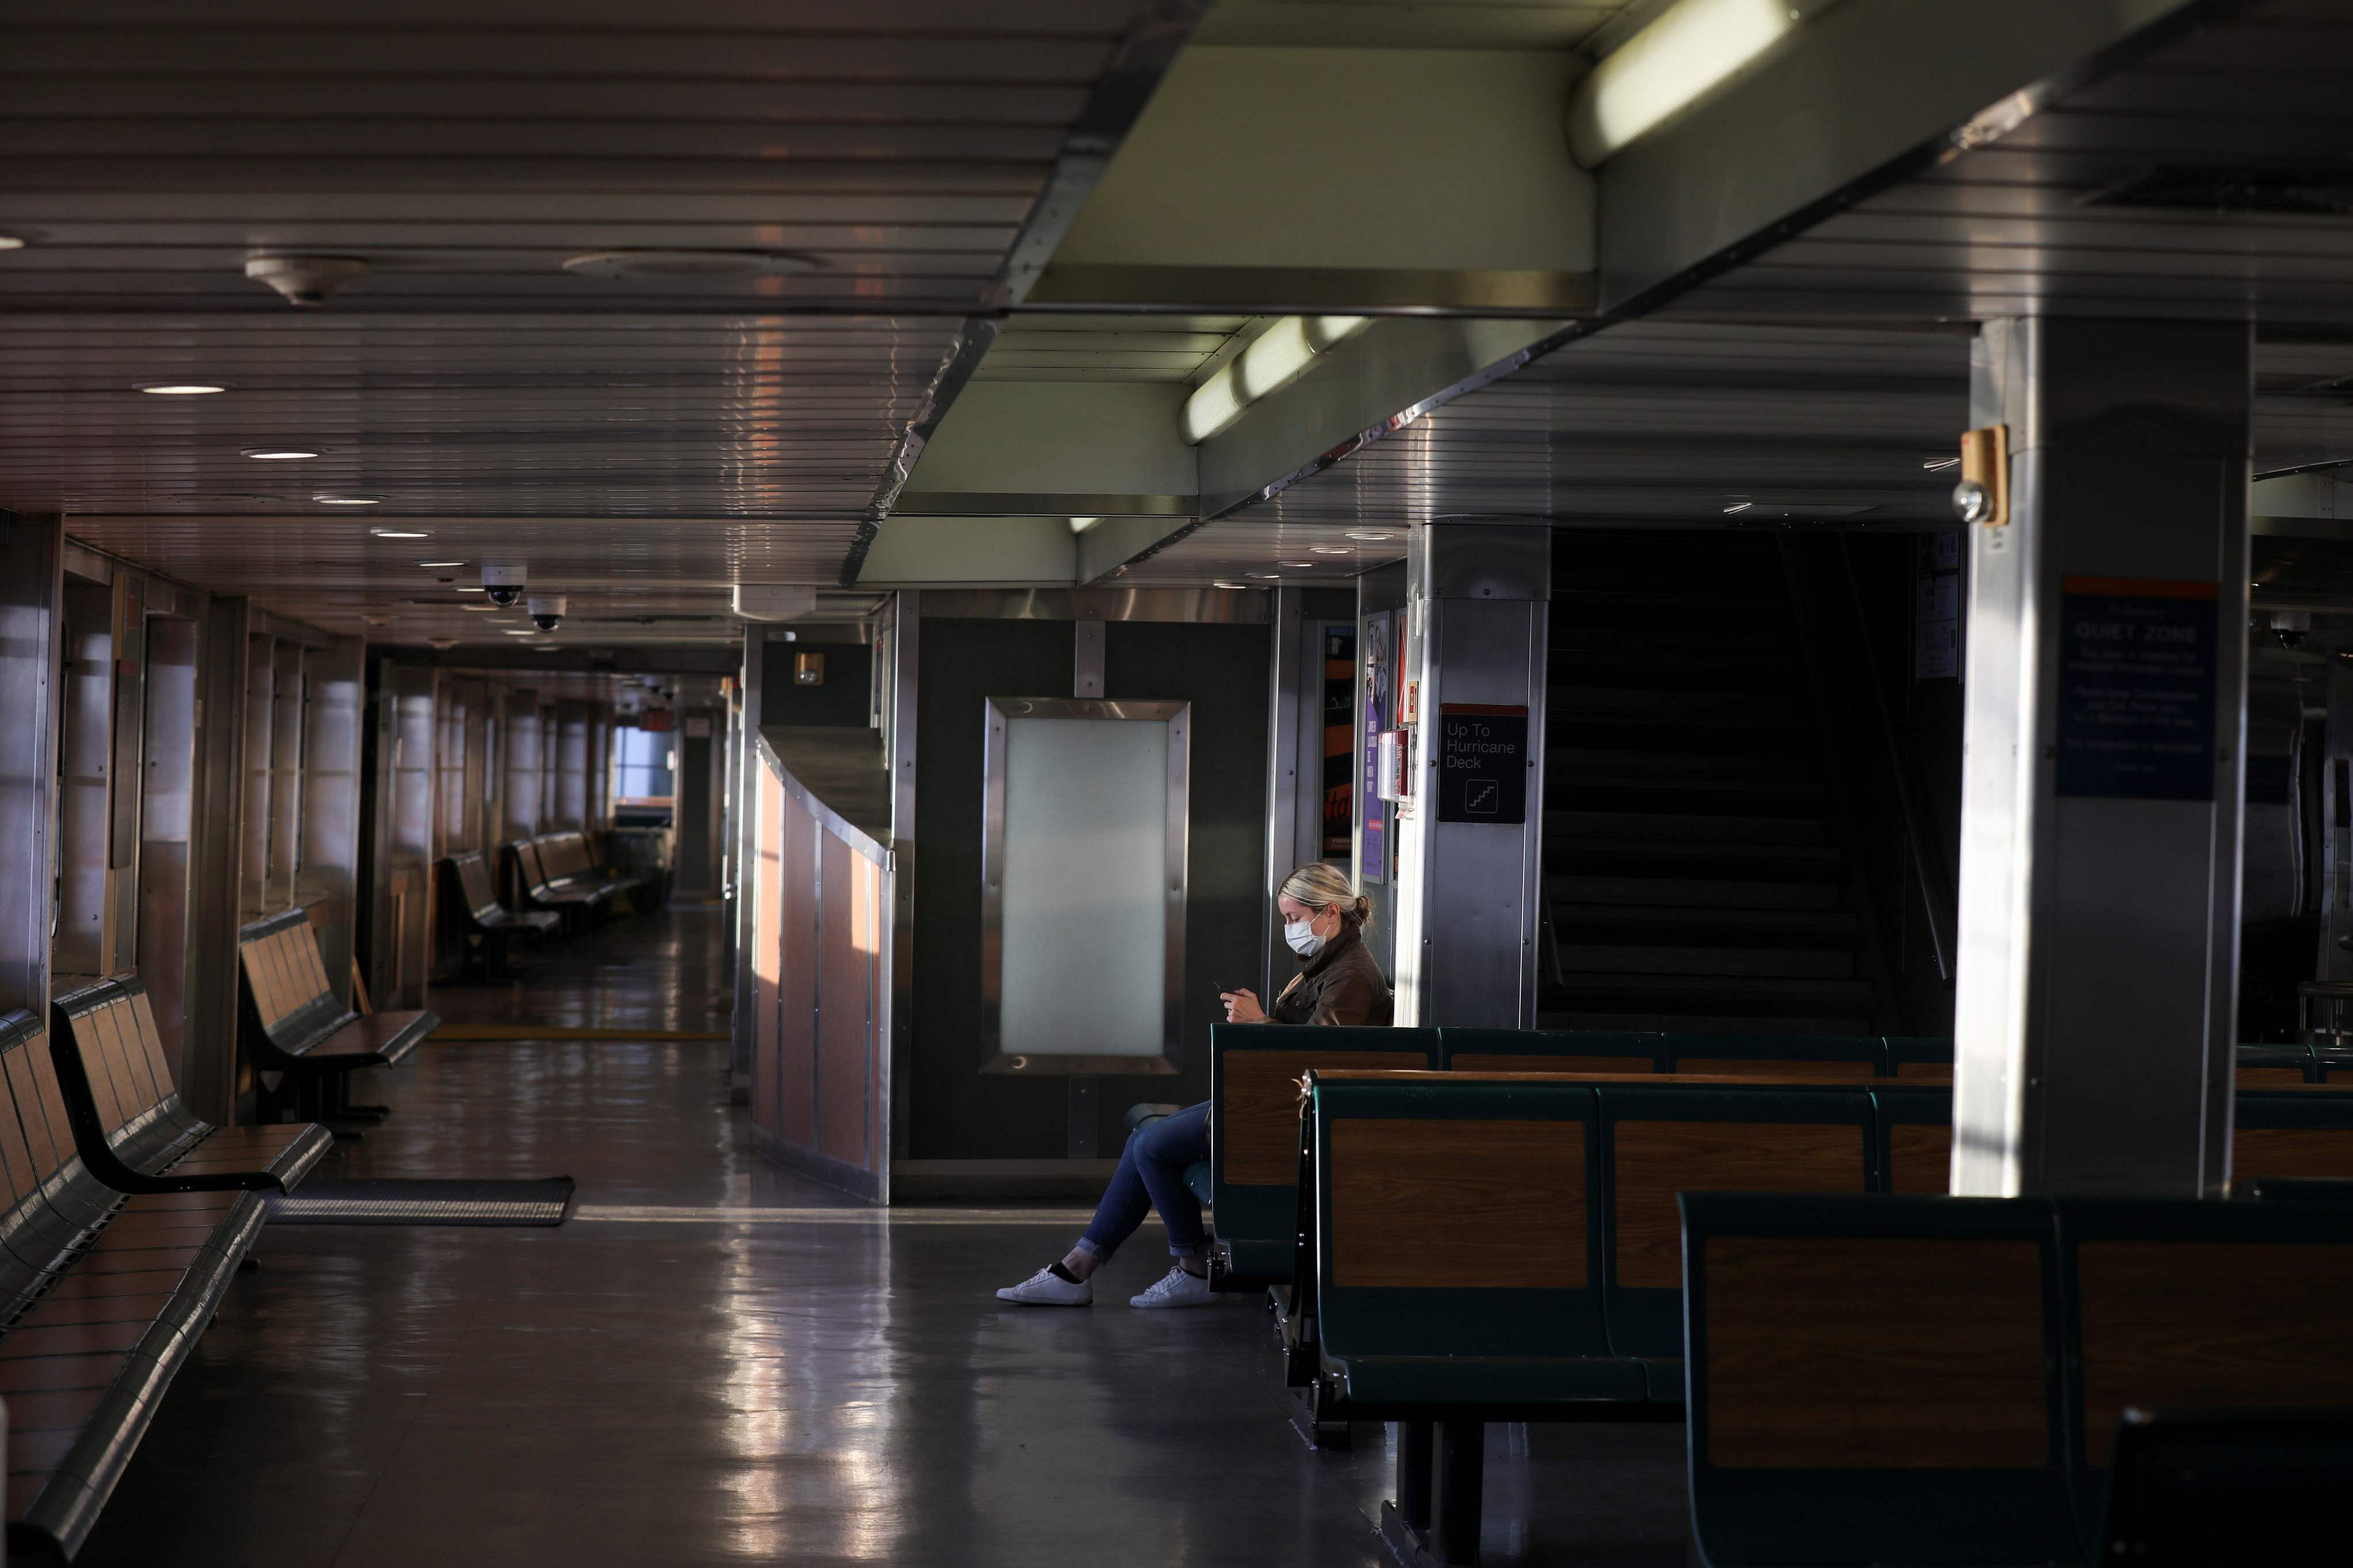 A commuter on the Staten Island Ferry wears a protective face mask and sits alone during the outbreak of the coronavirus disease (COVID-19) in Manhattan. (Credit: Reuters)